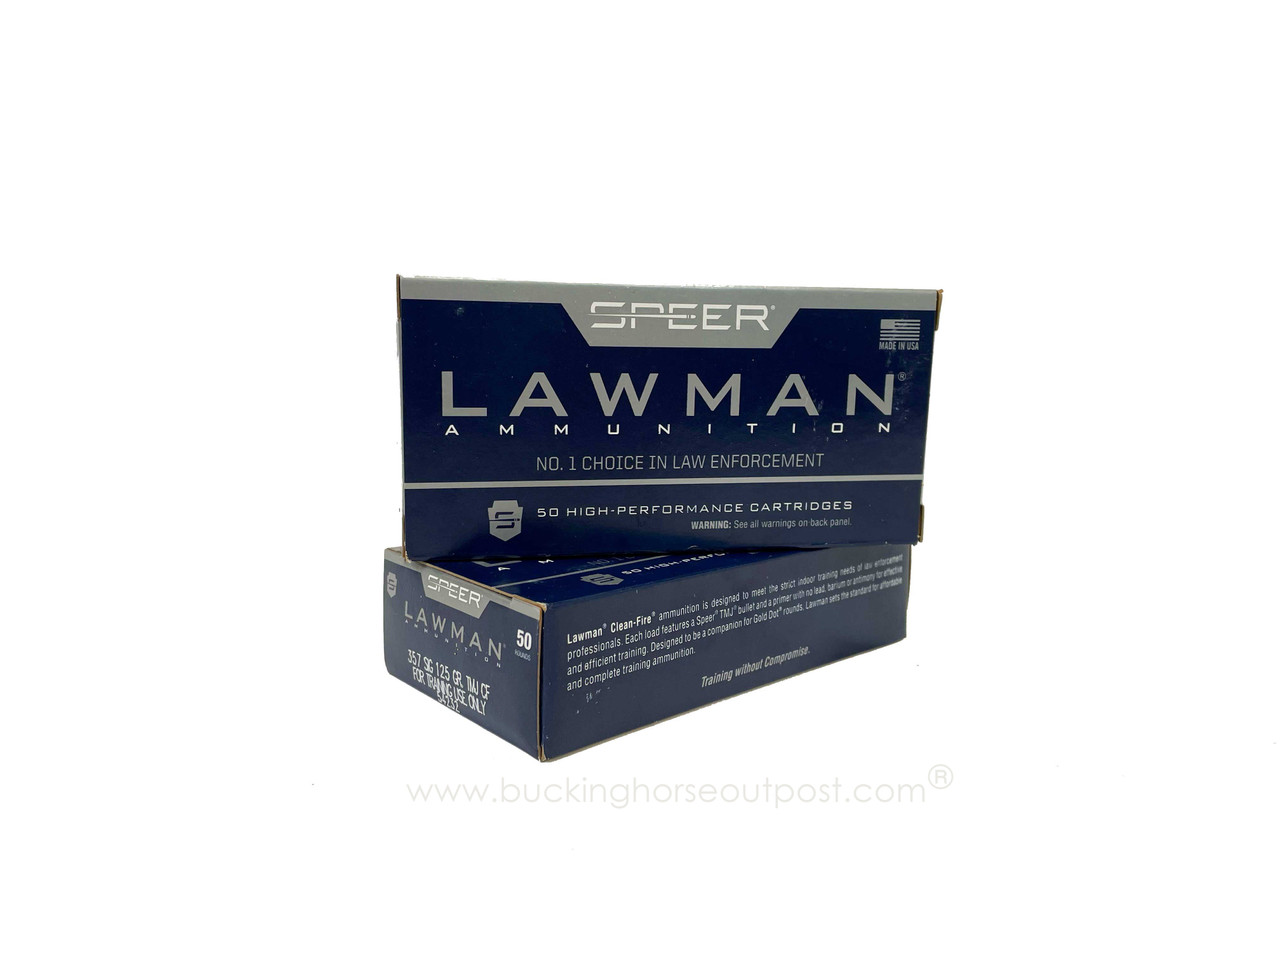 Speer Lawman CleanFire Training .357 Sig 125 Grain Total Metal Jacket 50rds Per Box (54232) Police Trade In- FREE SHIPPING ON ORDERS OVER $175